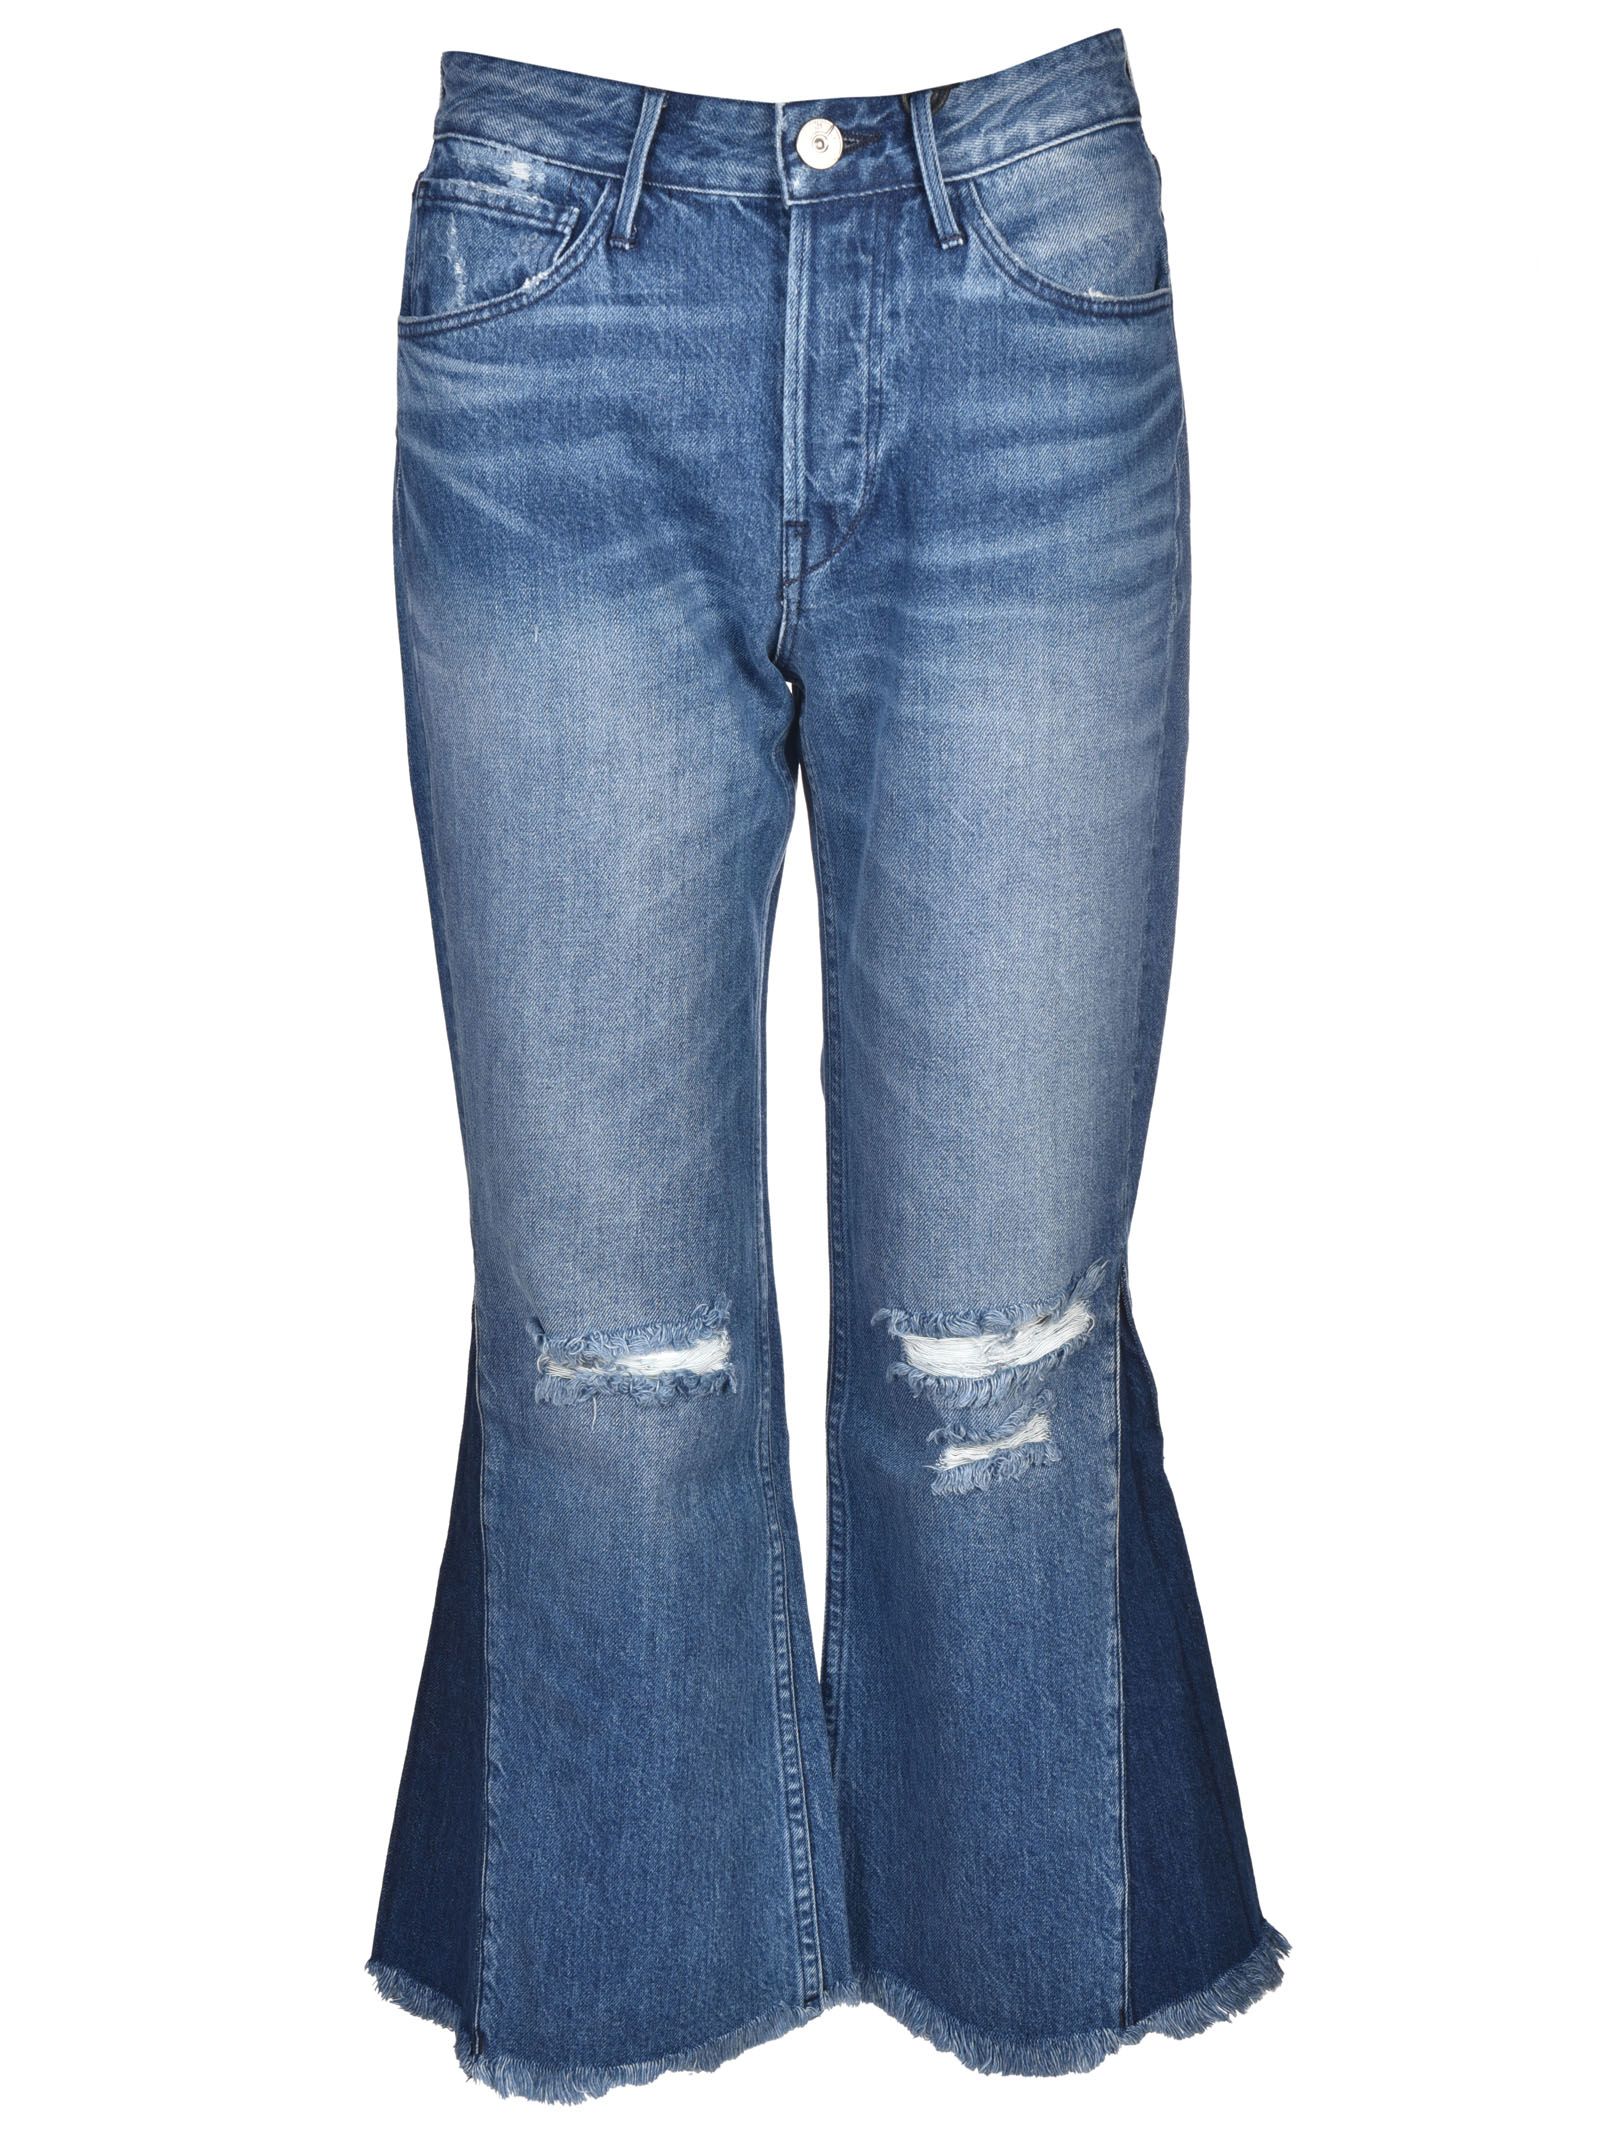 3x1 - 3x1 Higher Ground Gusset Jeans - Blue, Women's Jeans | Italist